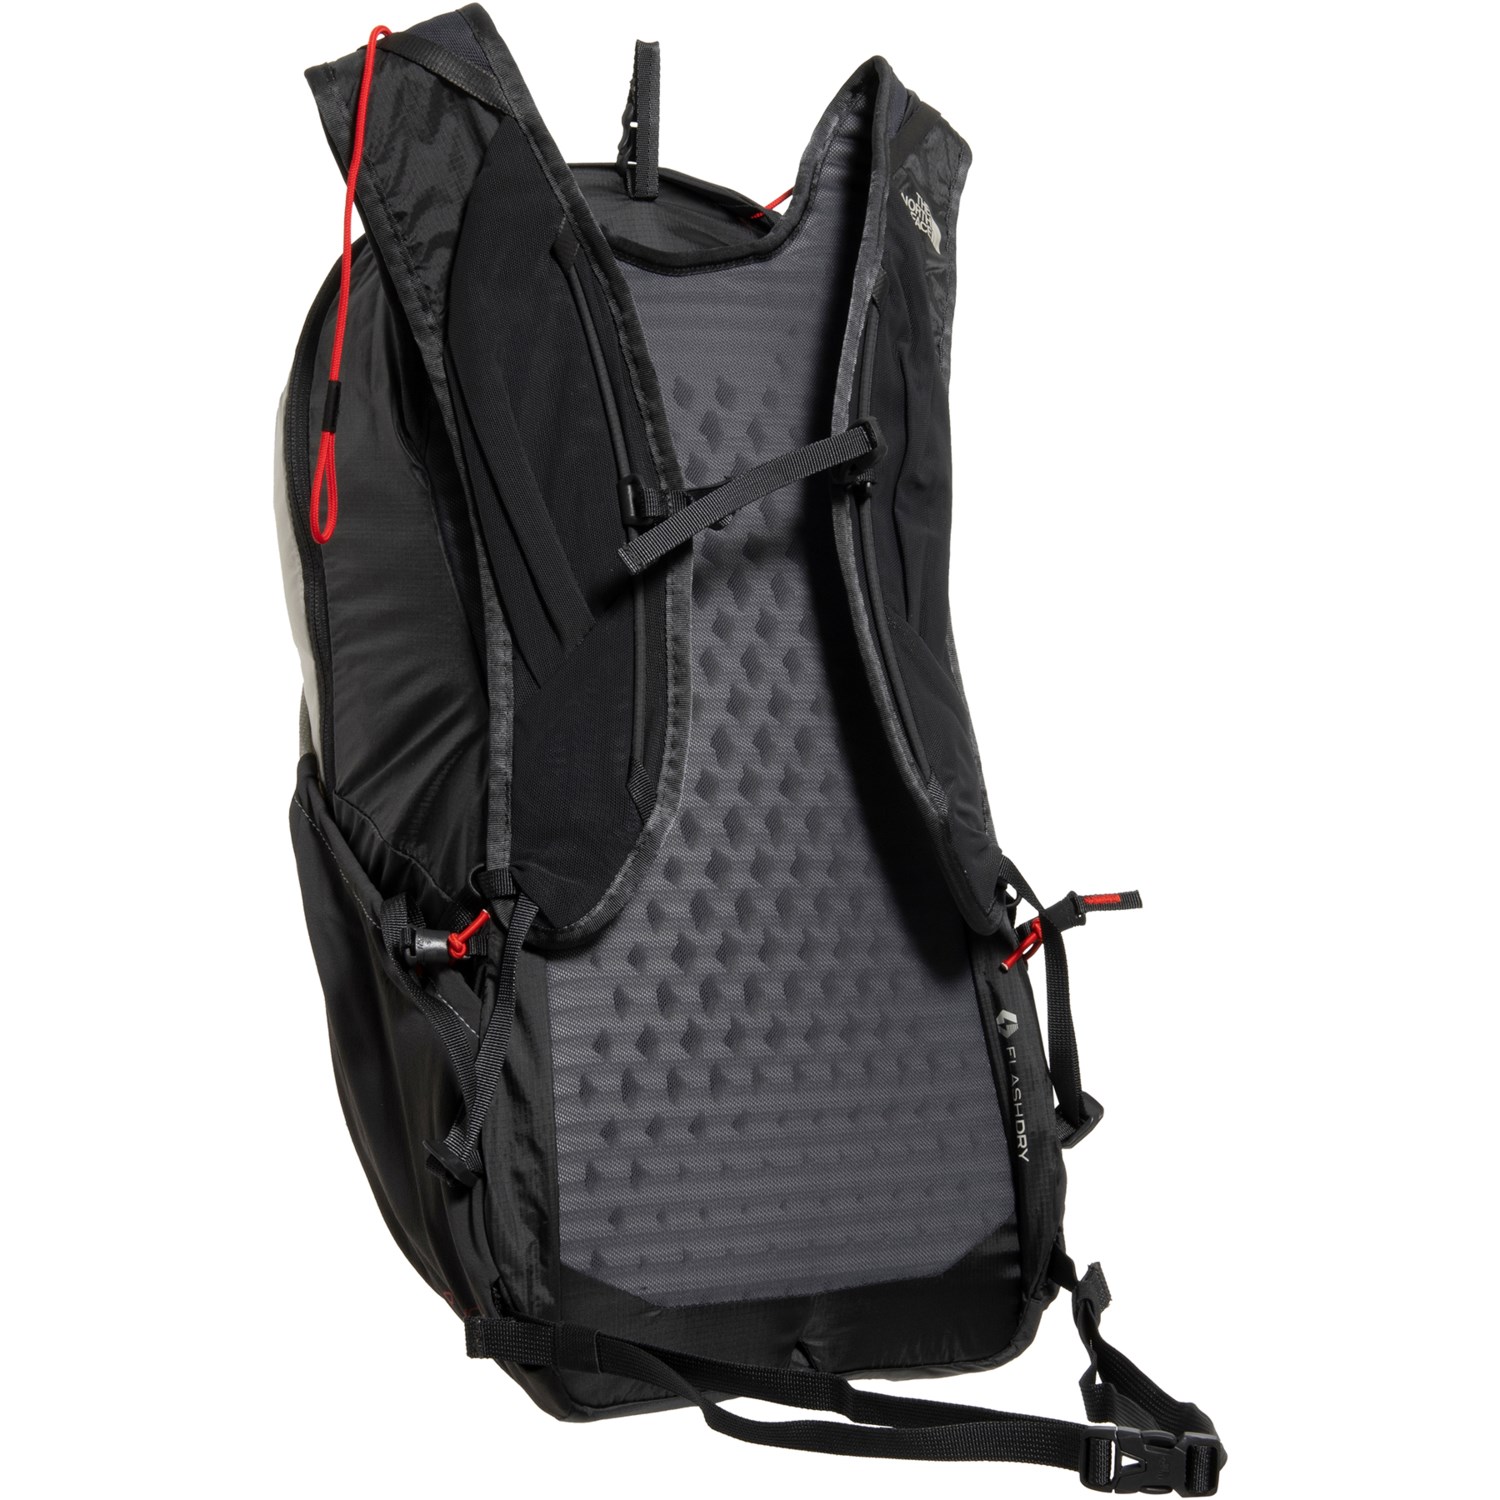 The North Face Chimera 24 L Backpack